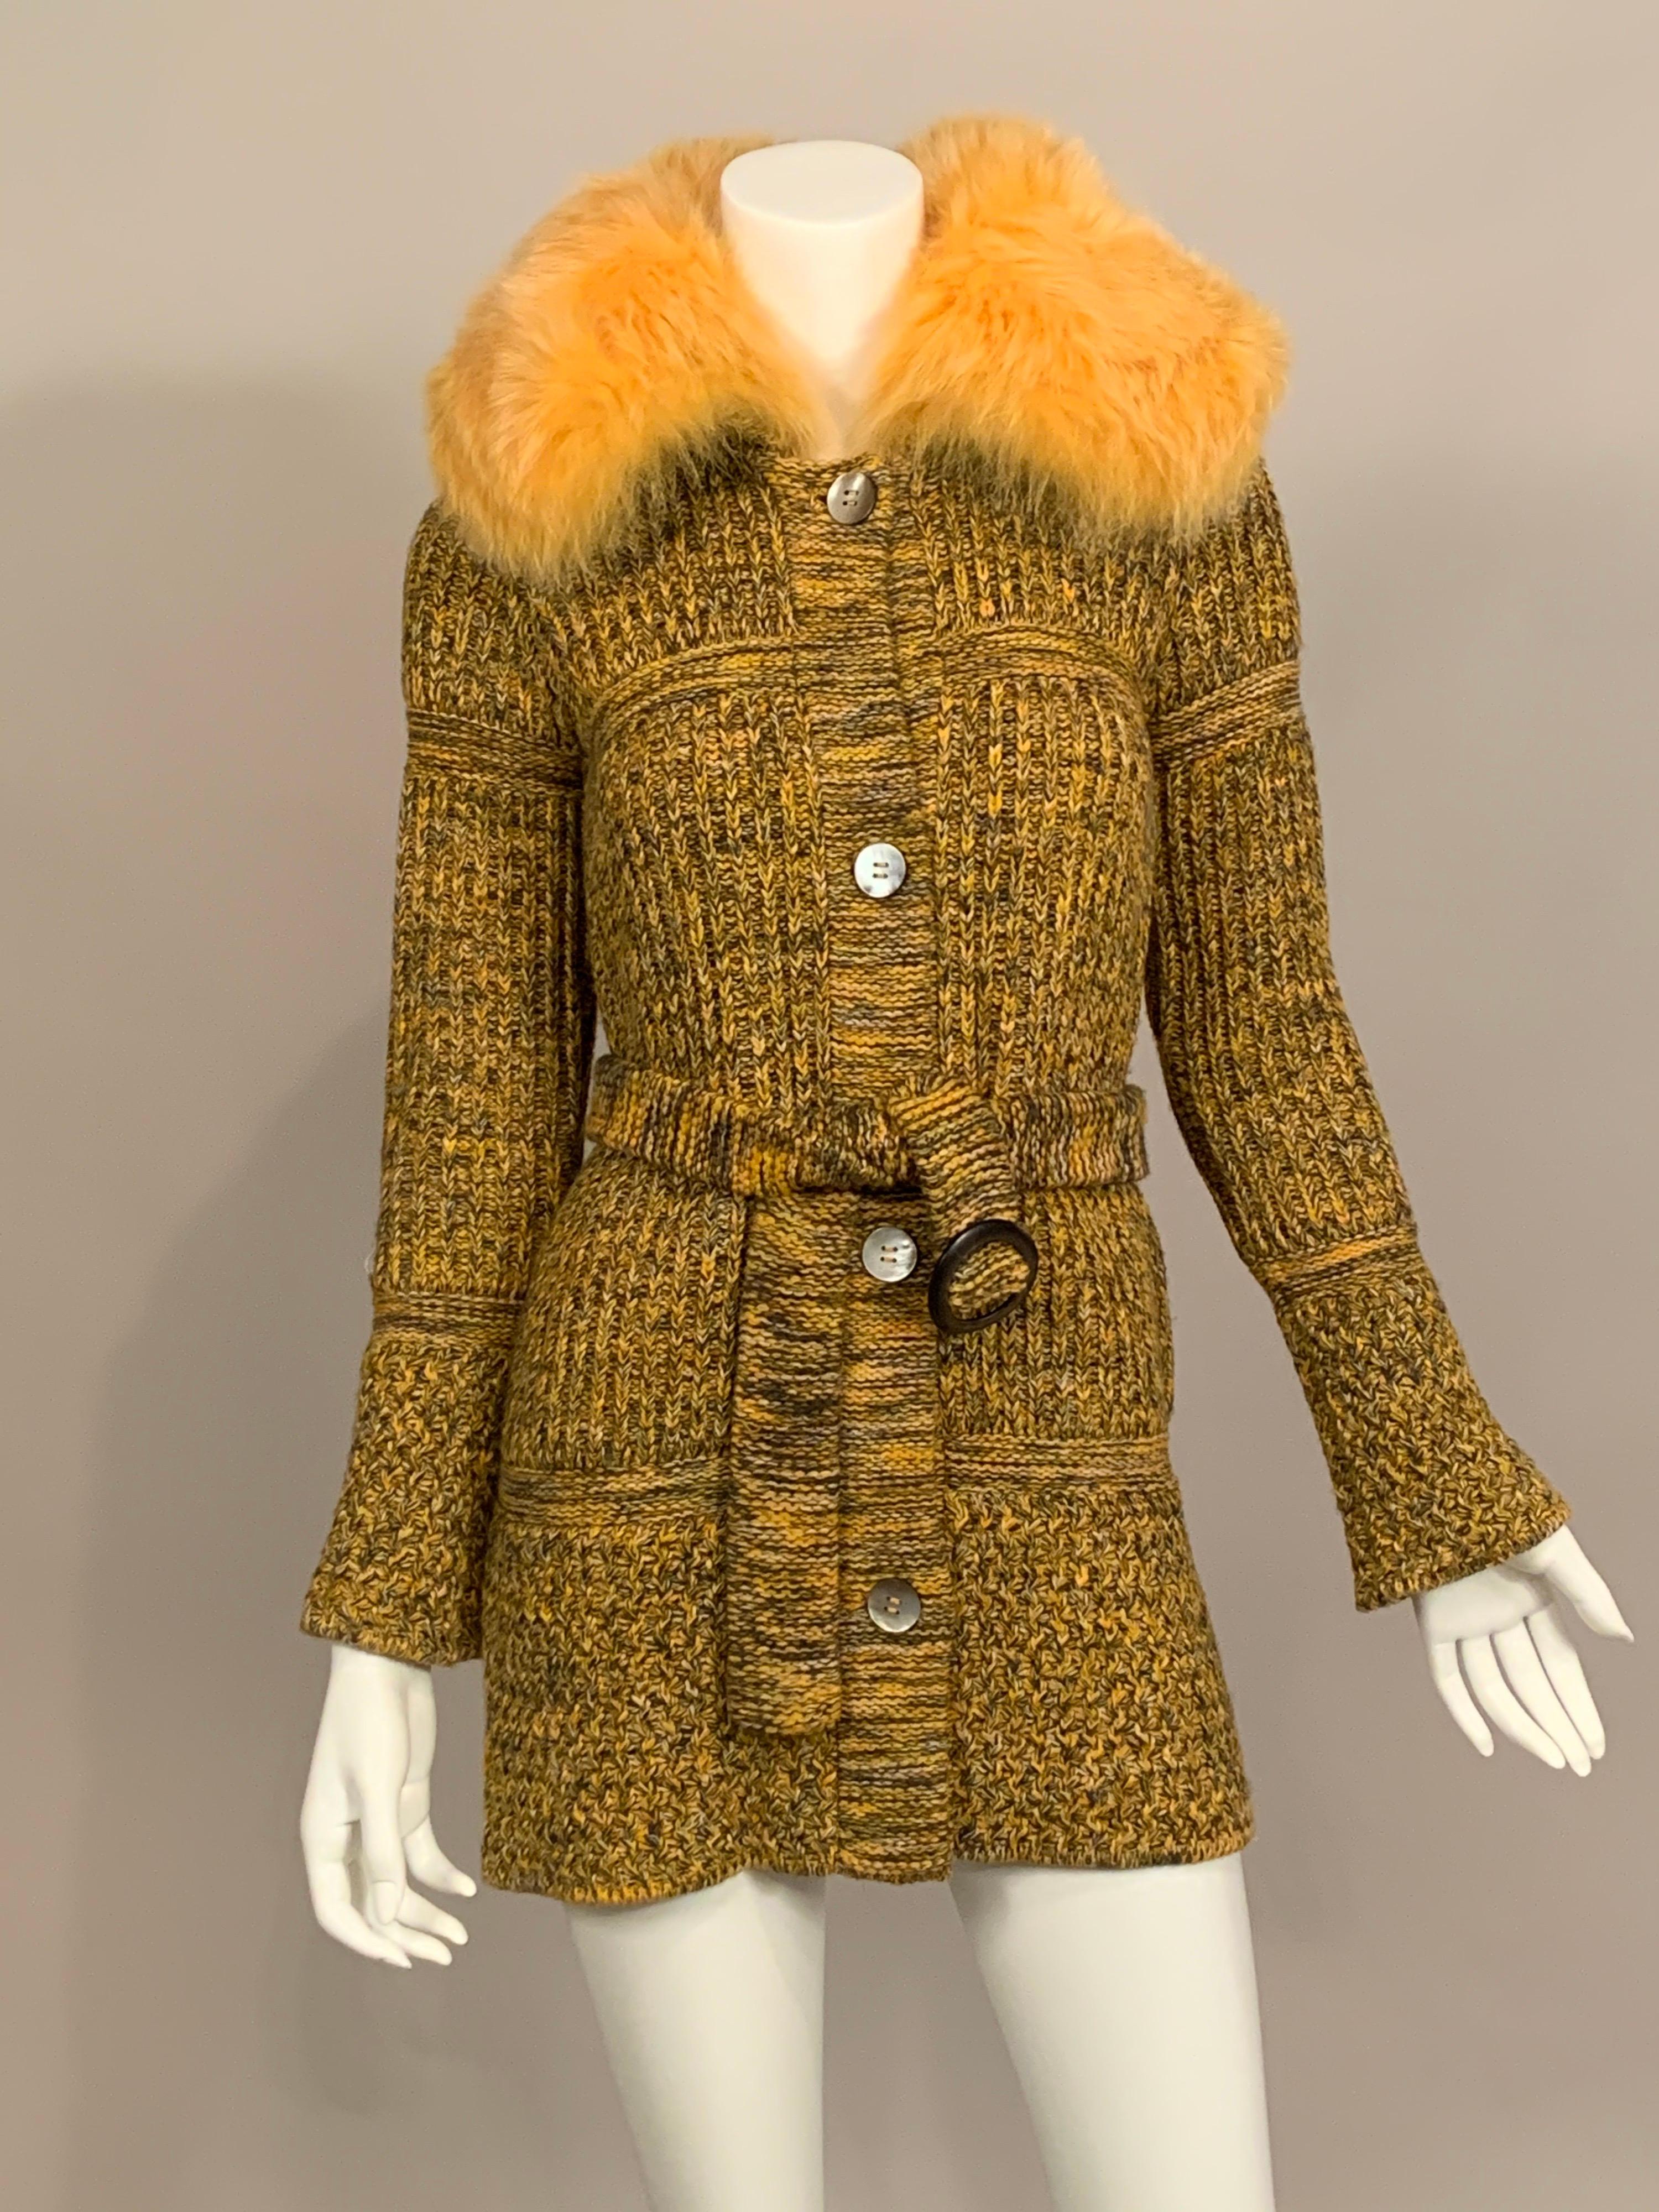 Knit from a multicolor yarn in shades of yellow, orange, charcoal, black and white this sweater includes several different knit patterns in large panels creating an interesting modern design.  It has a fluffy yellow/orange fox collar and four grey